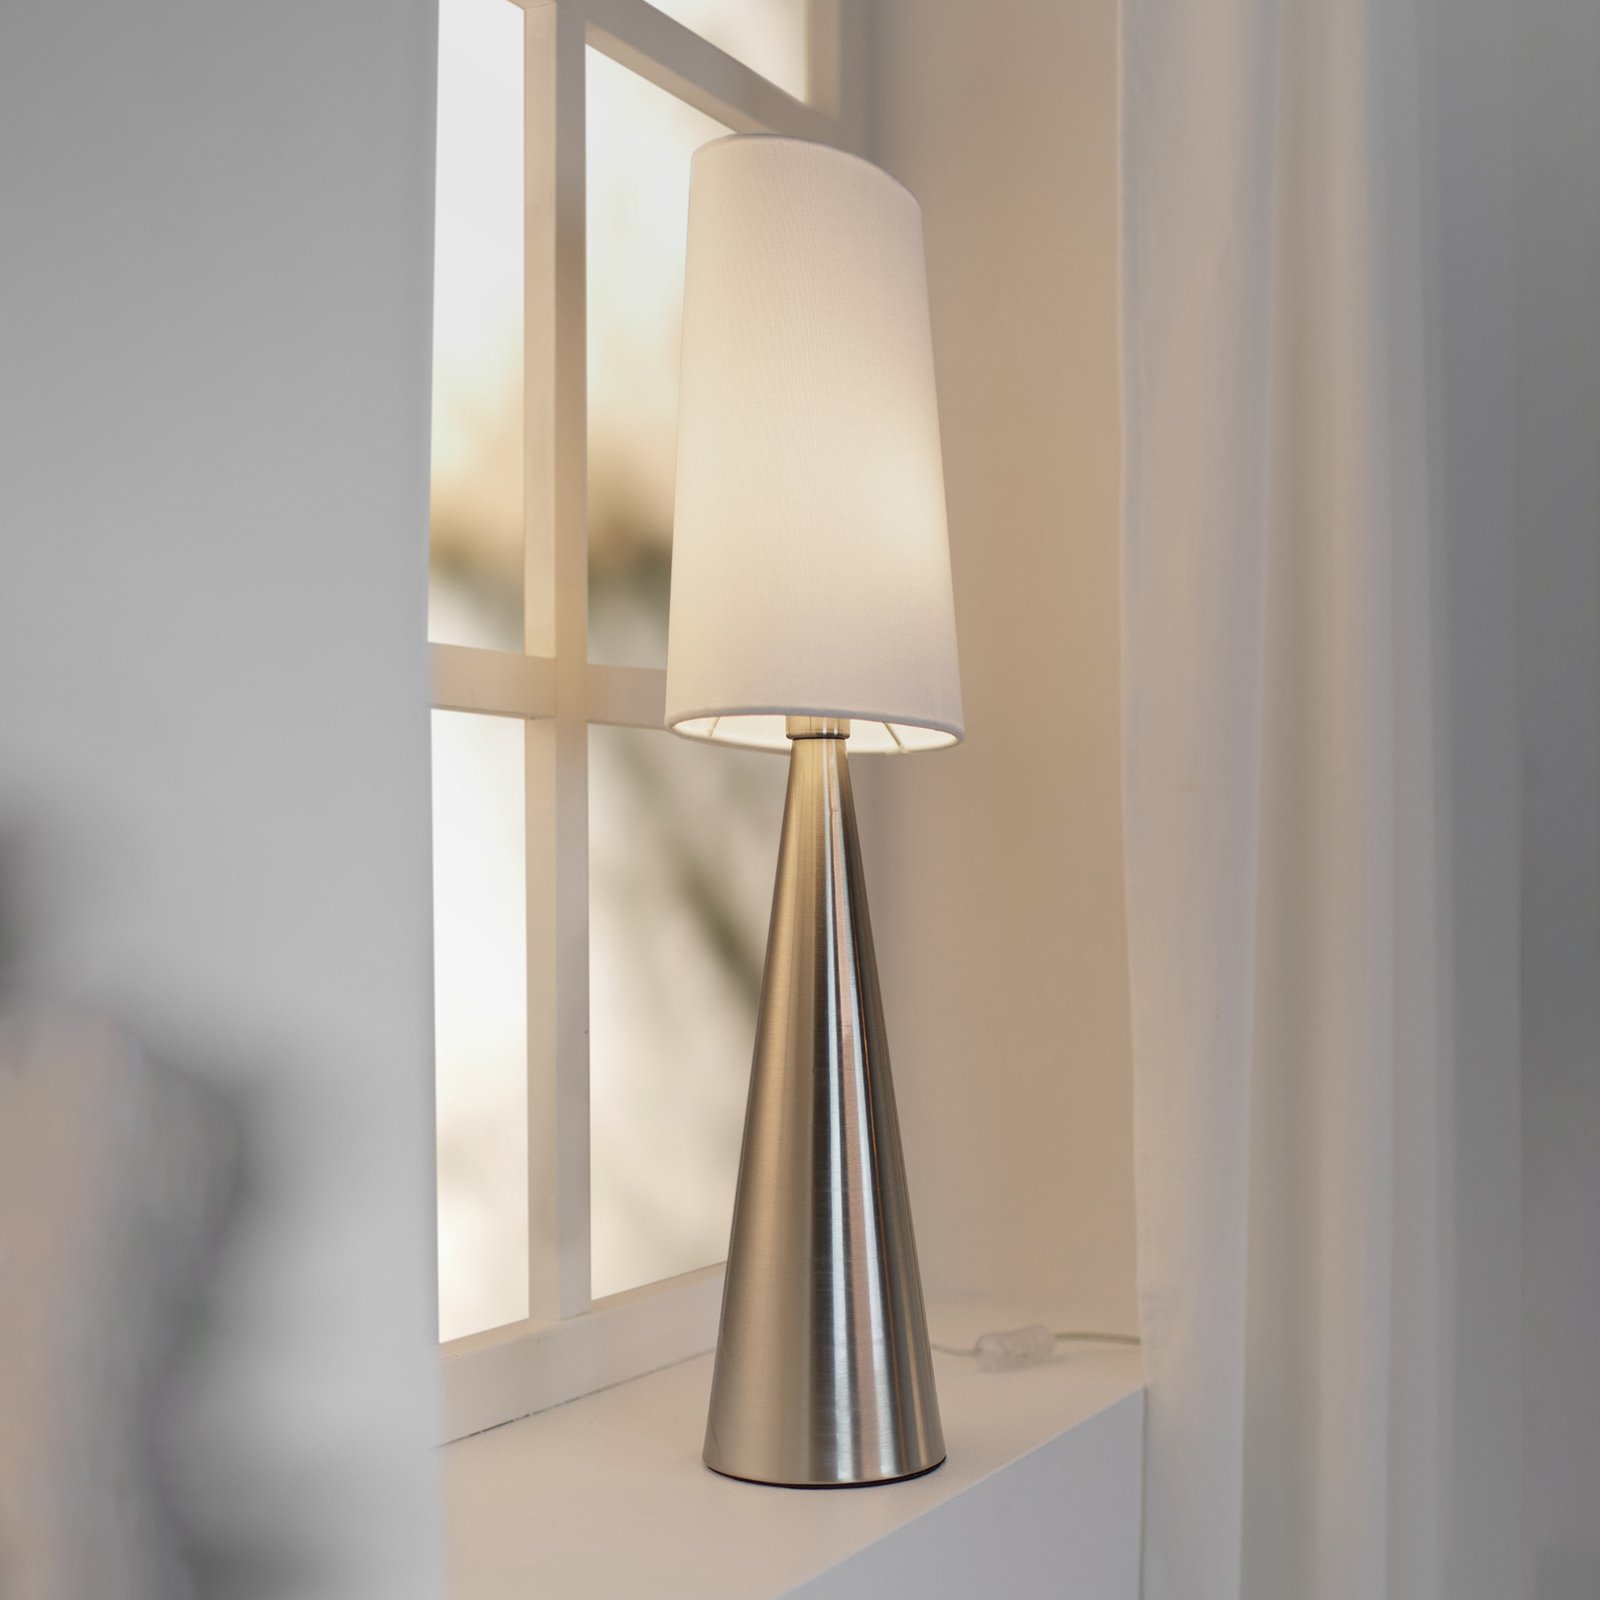 Conus table lamp with off-white lampshade, nickel